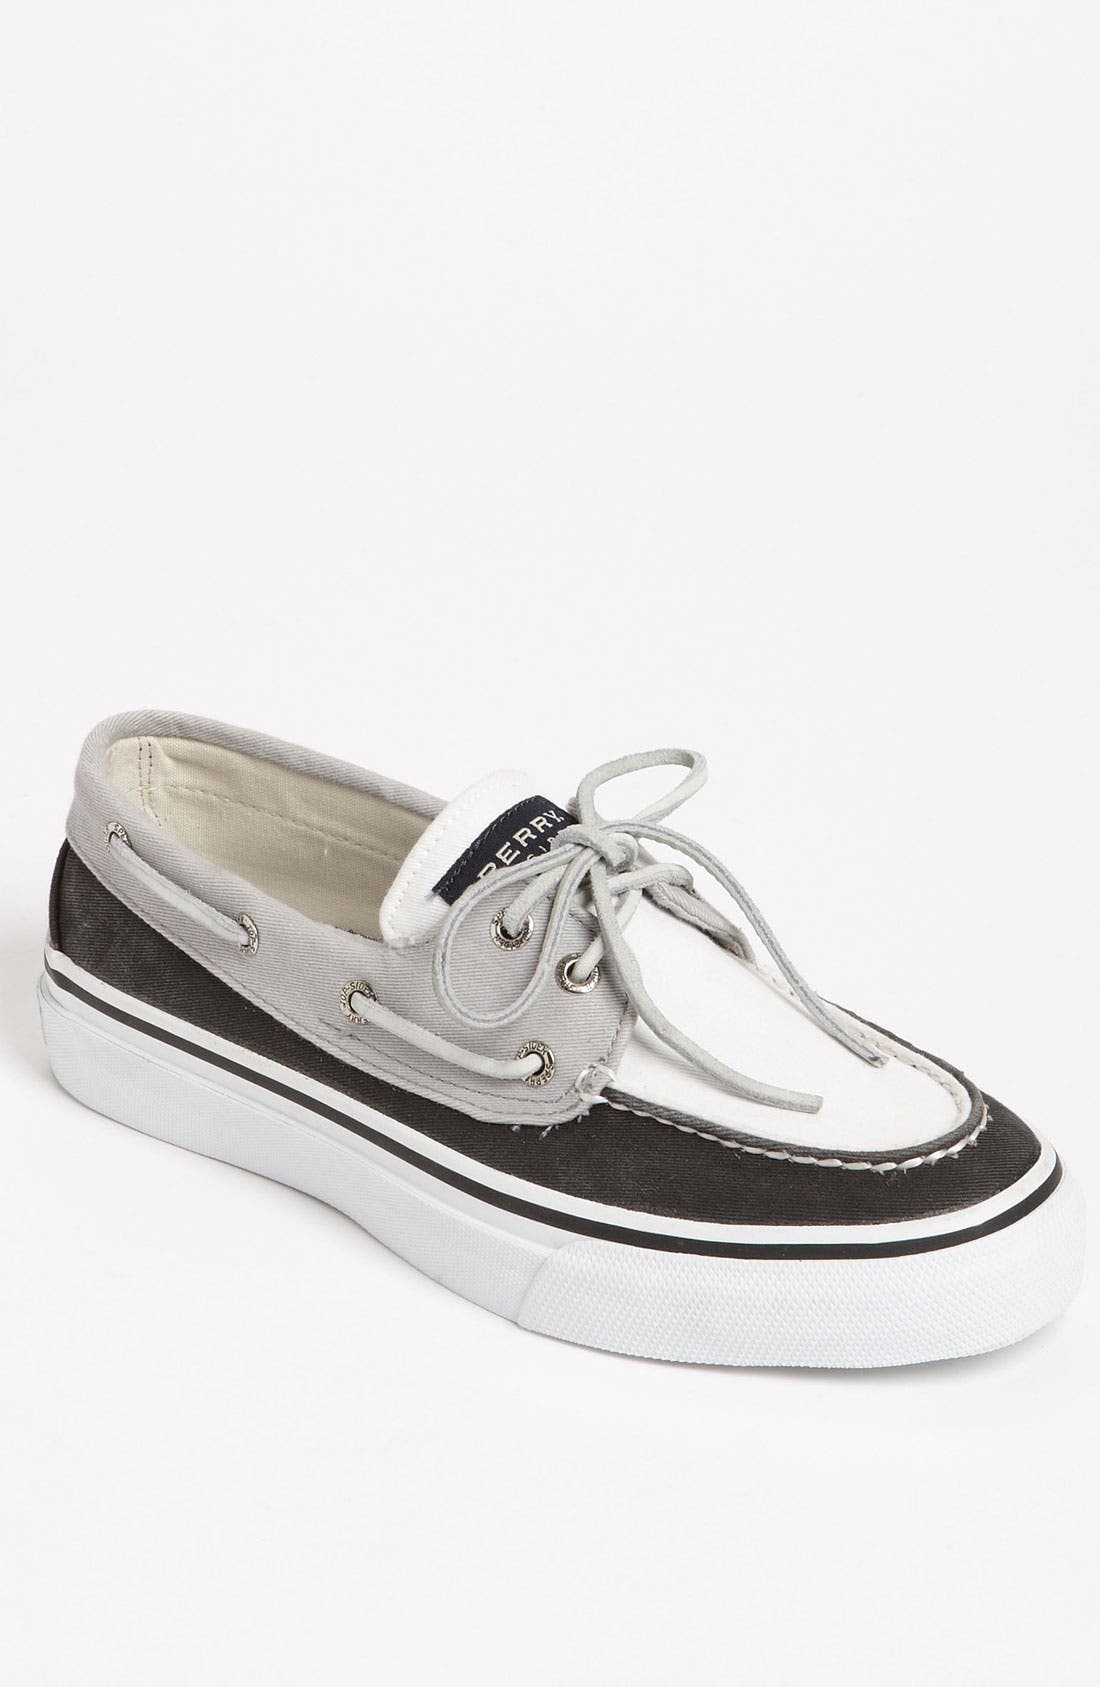 Sperry Top-Sider® 'Bahama' Boat Shoe 